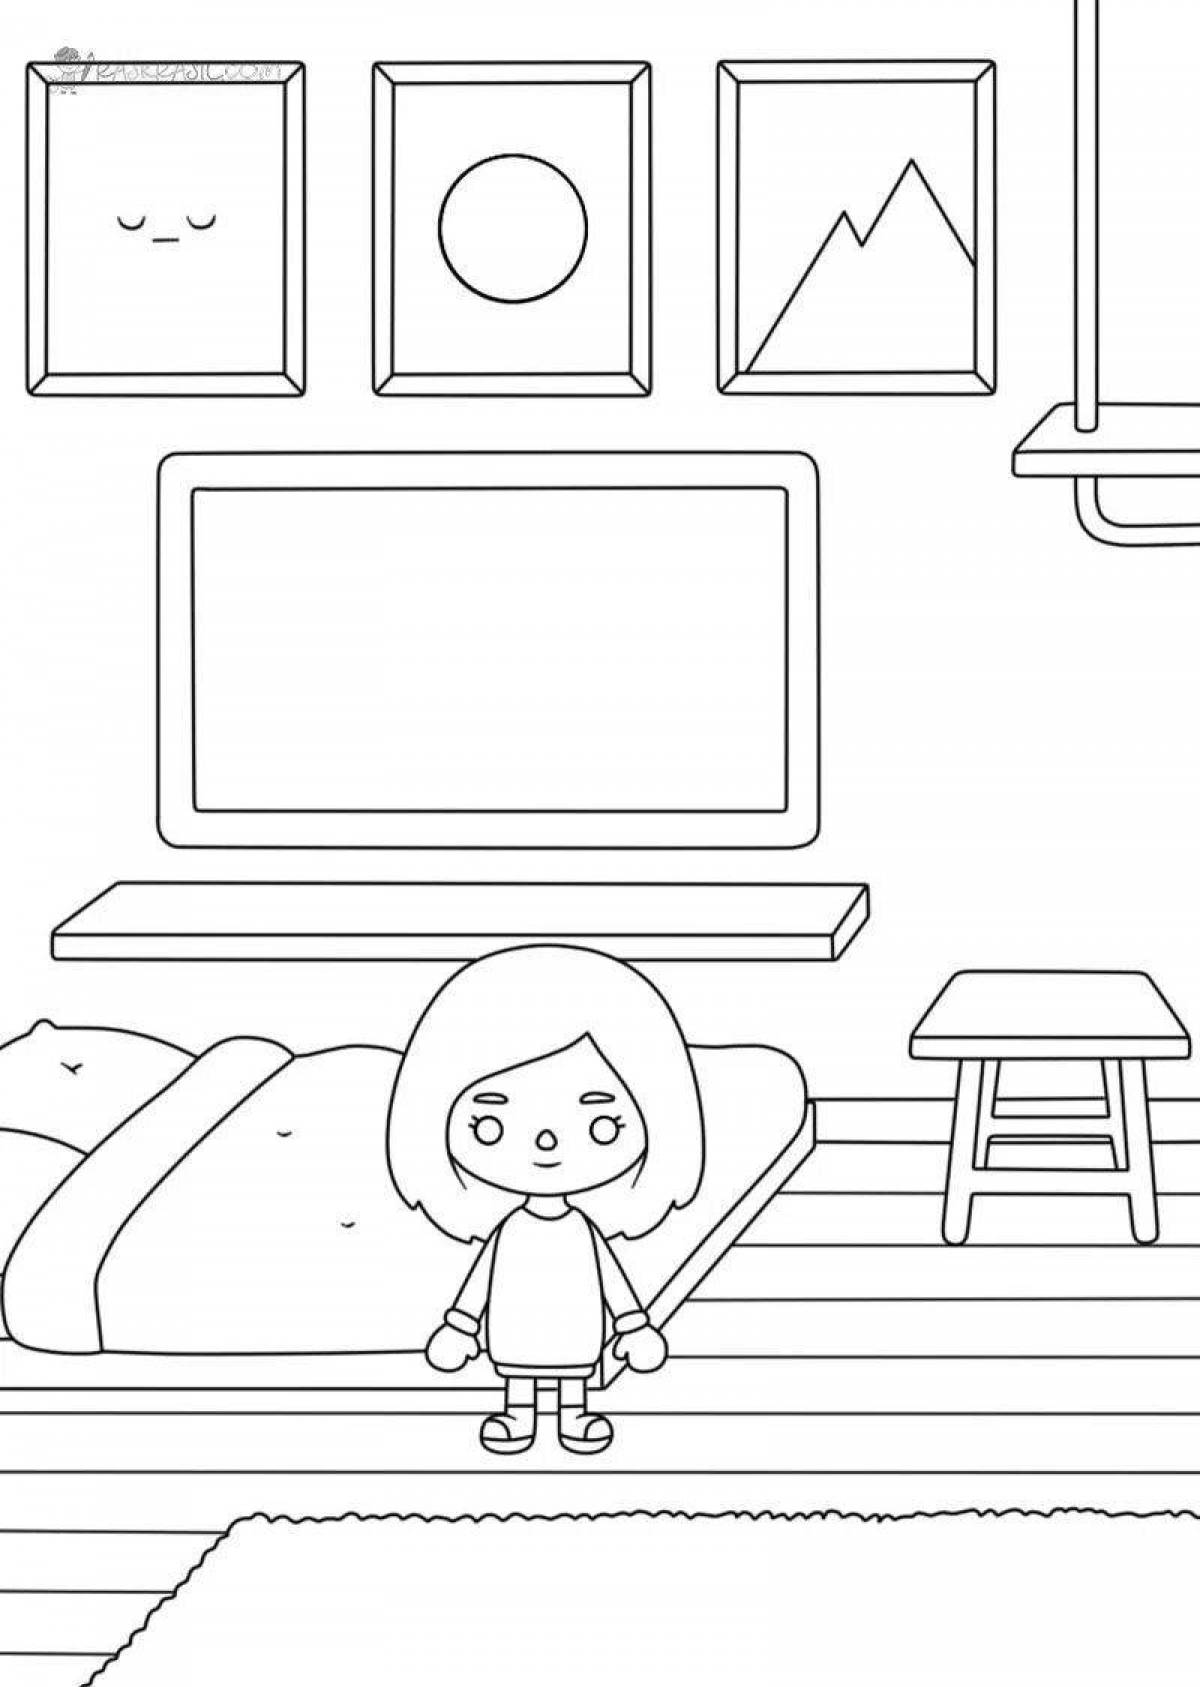 Tempting side coloring pages